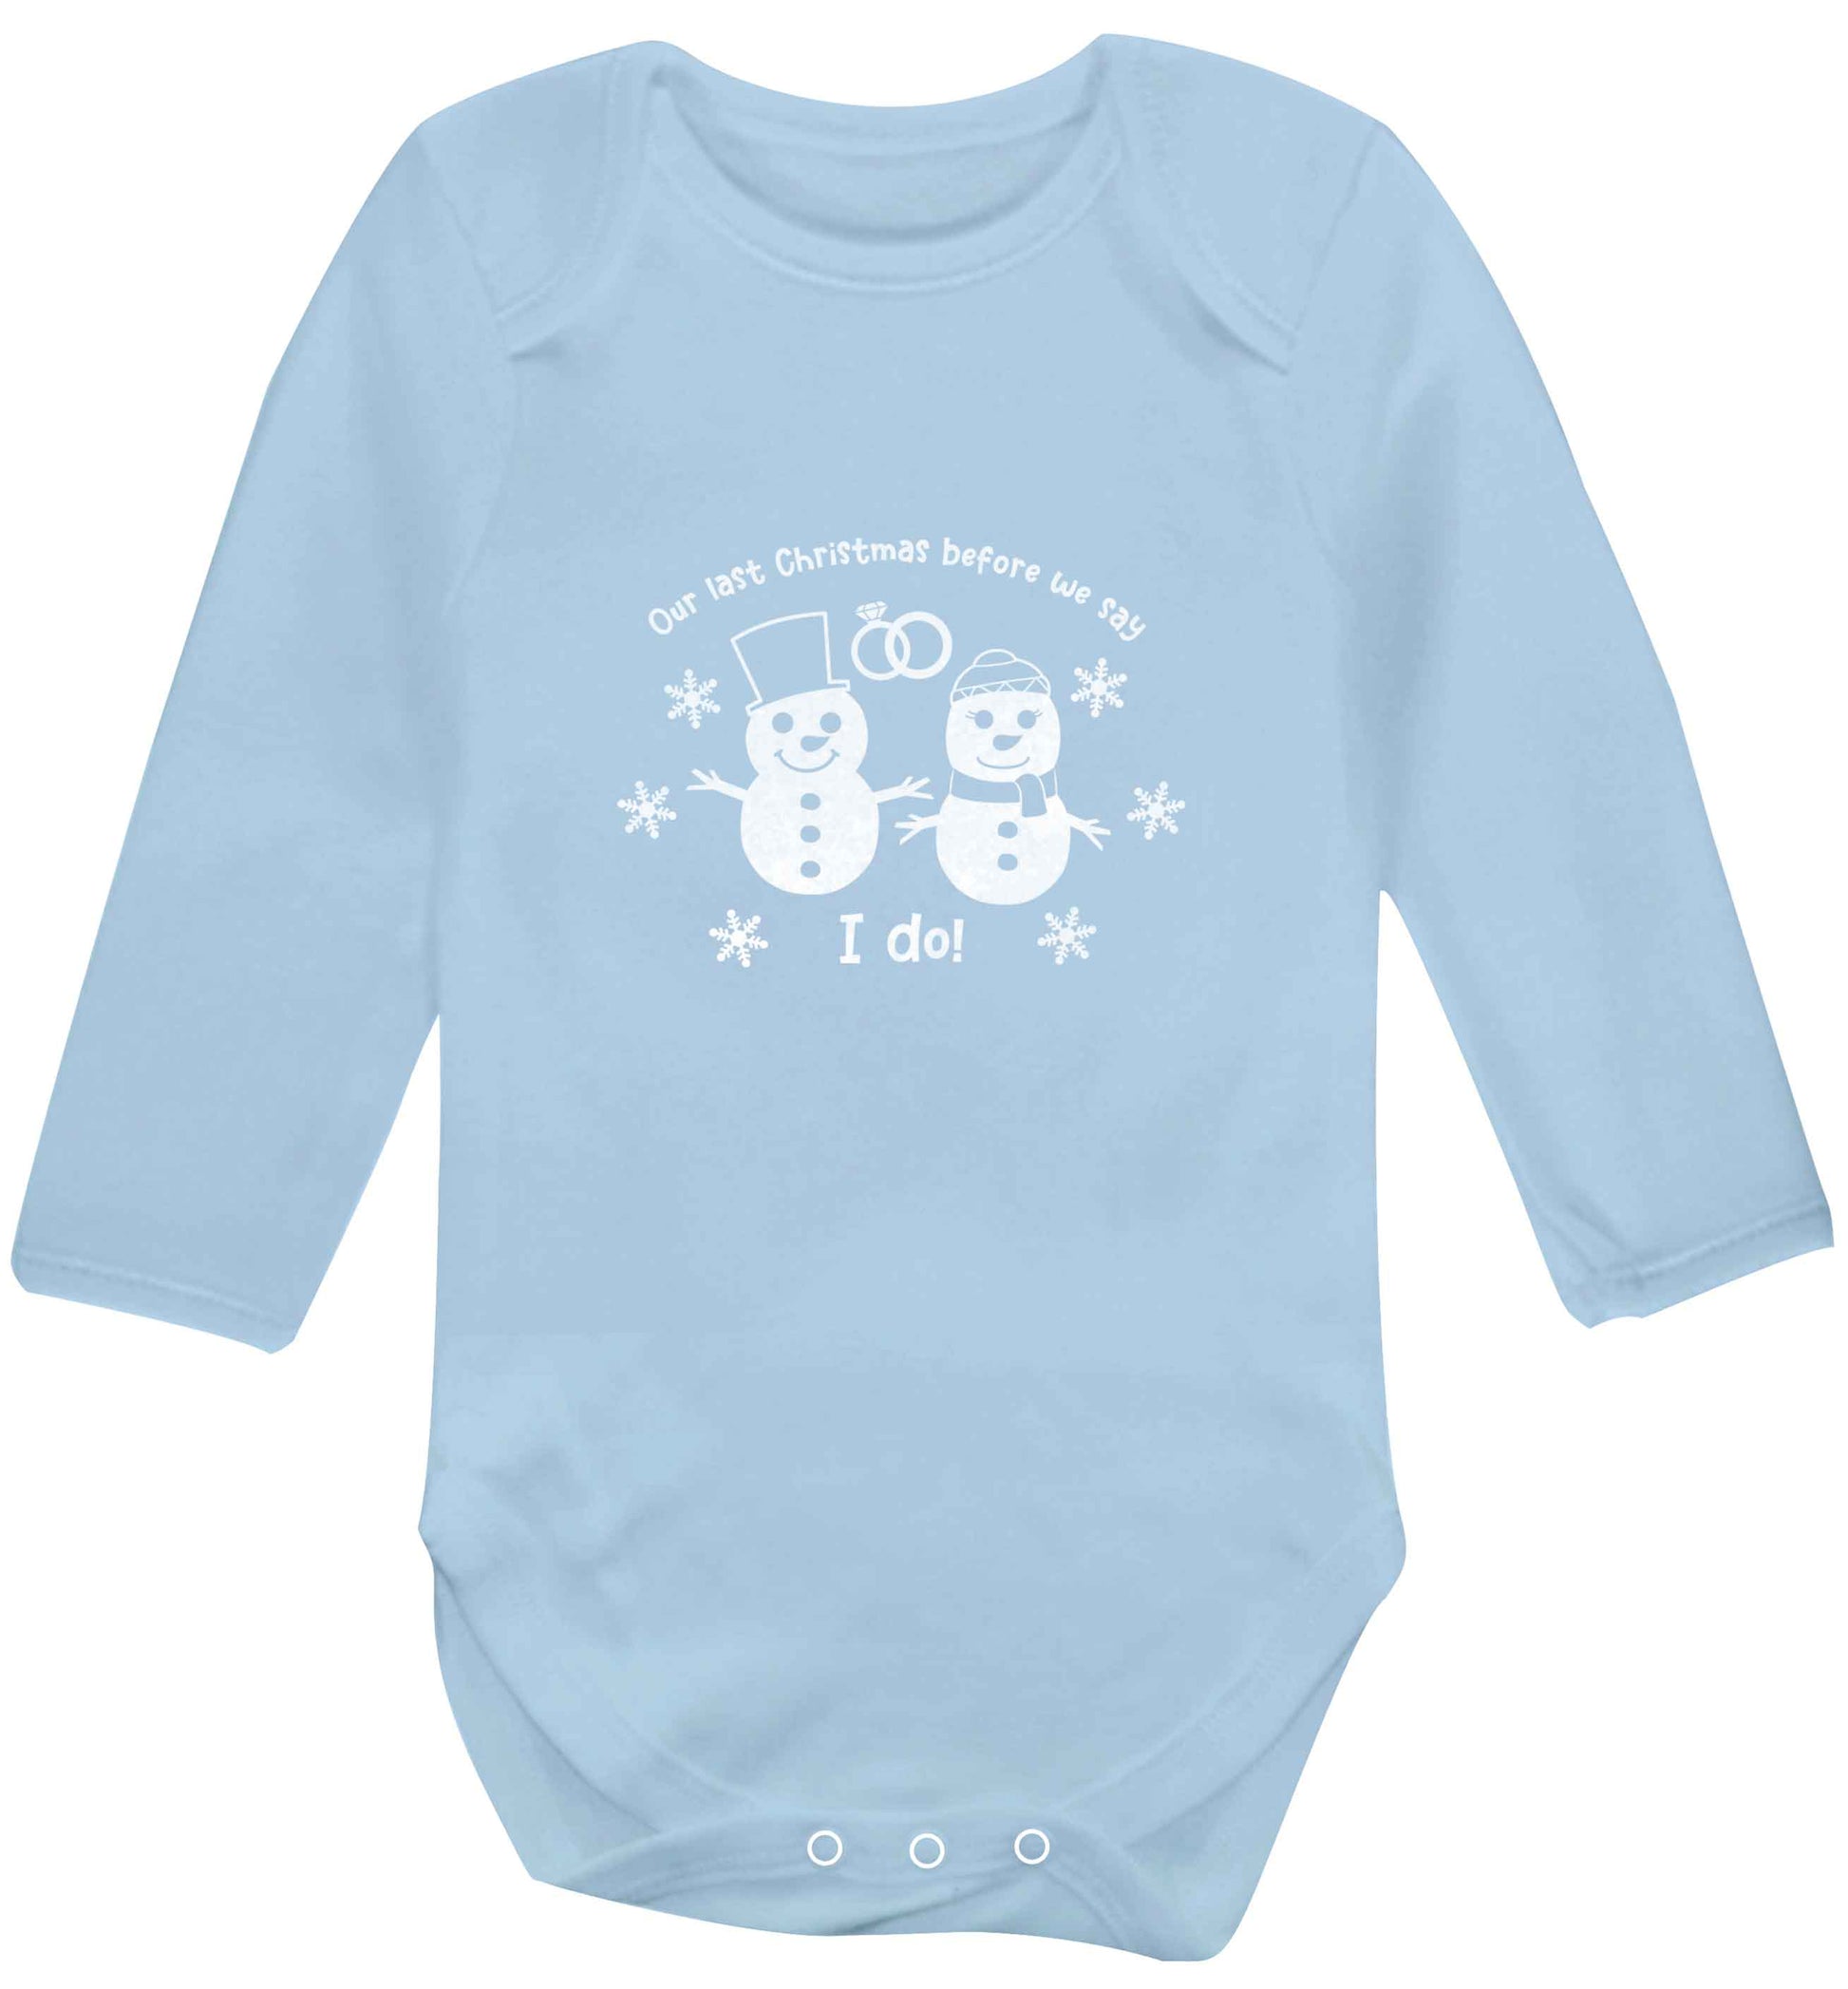 Last Christmas before we say I do baby vest long sleeved pale blue 6-12 months